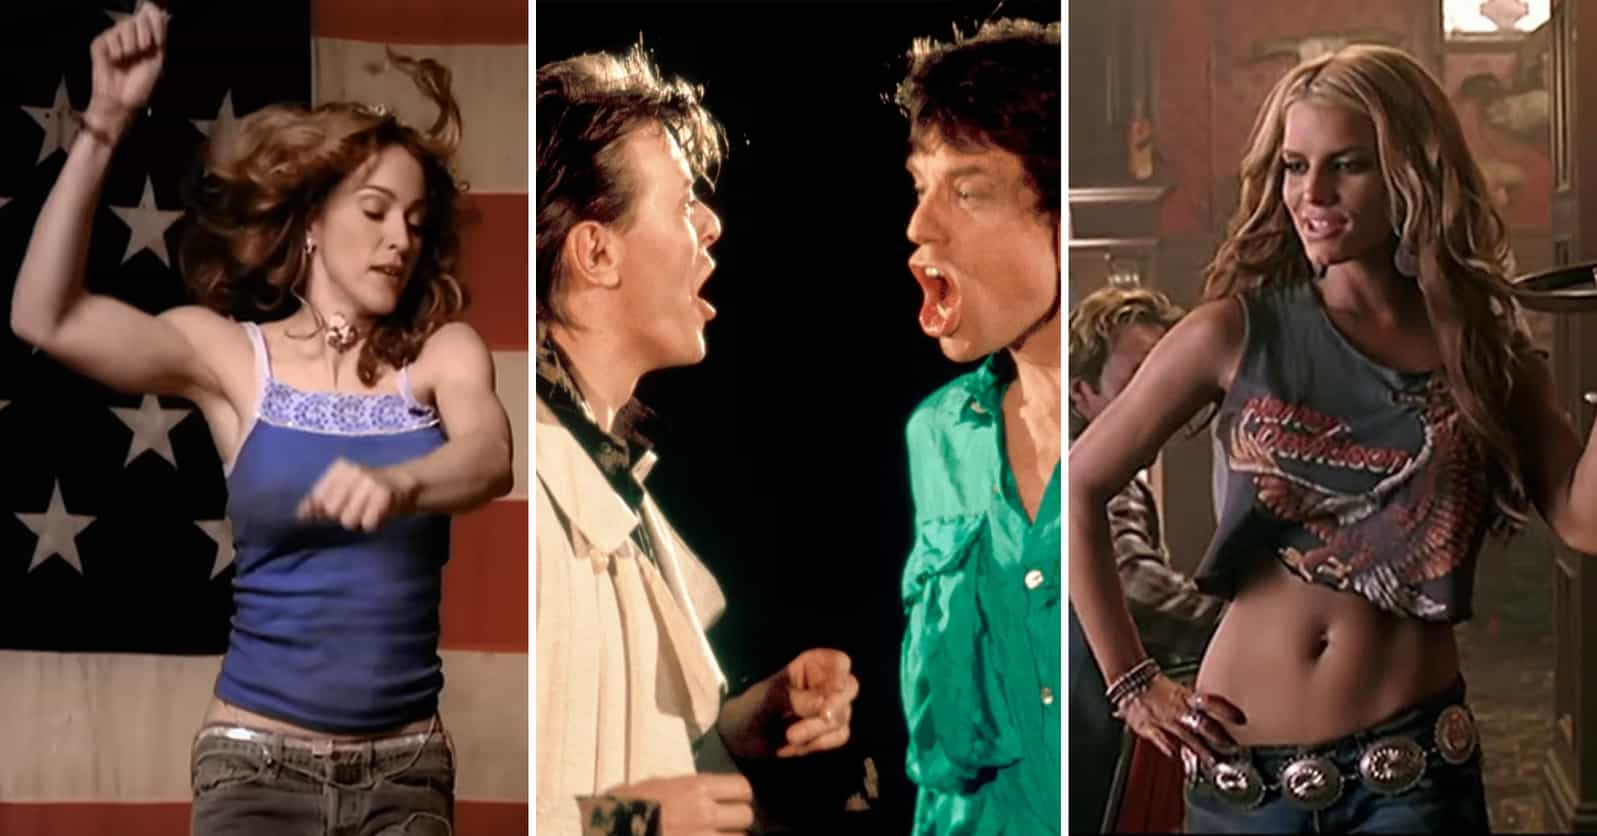 The Worst Cover Songs, Ranked By How Much They Butchered The Originals